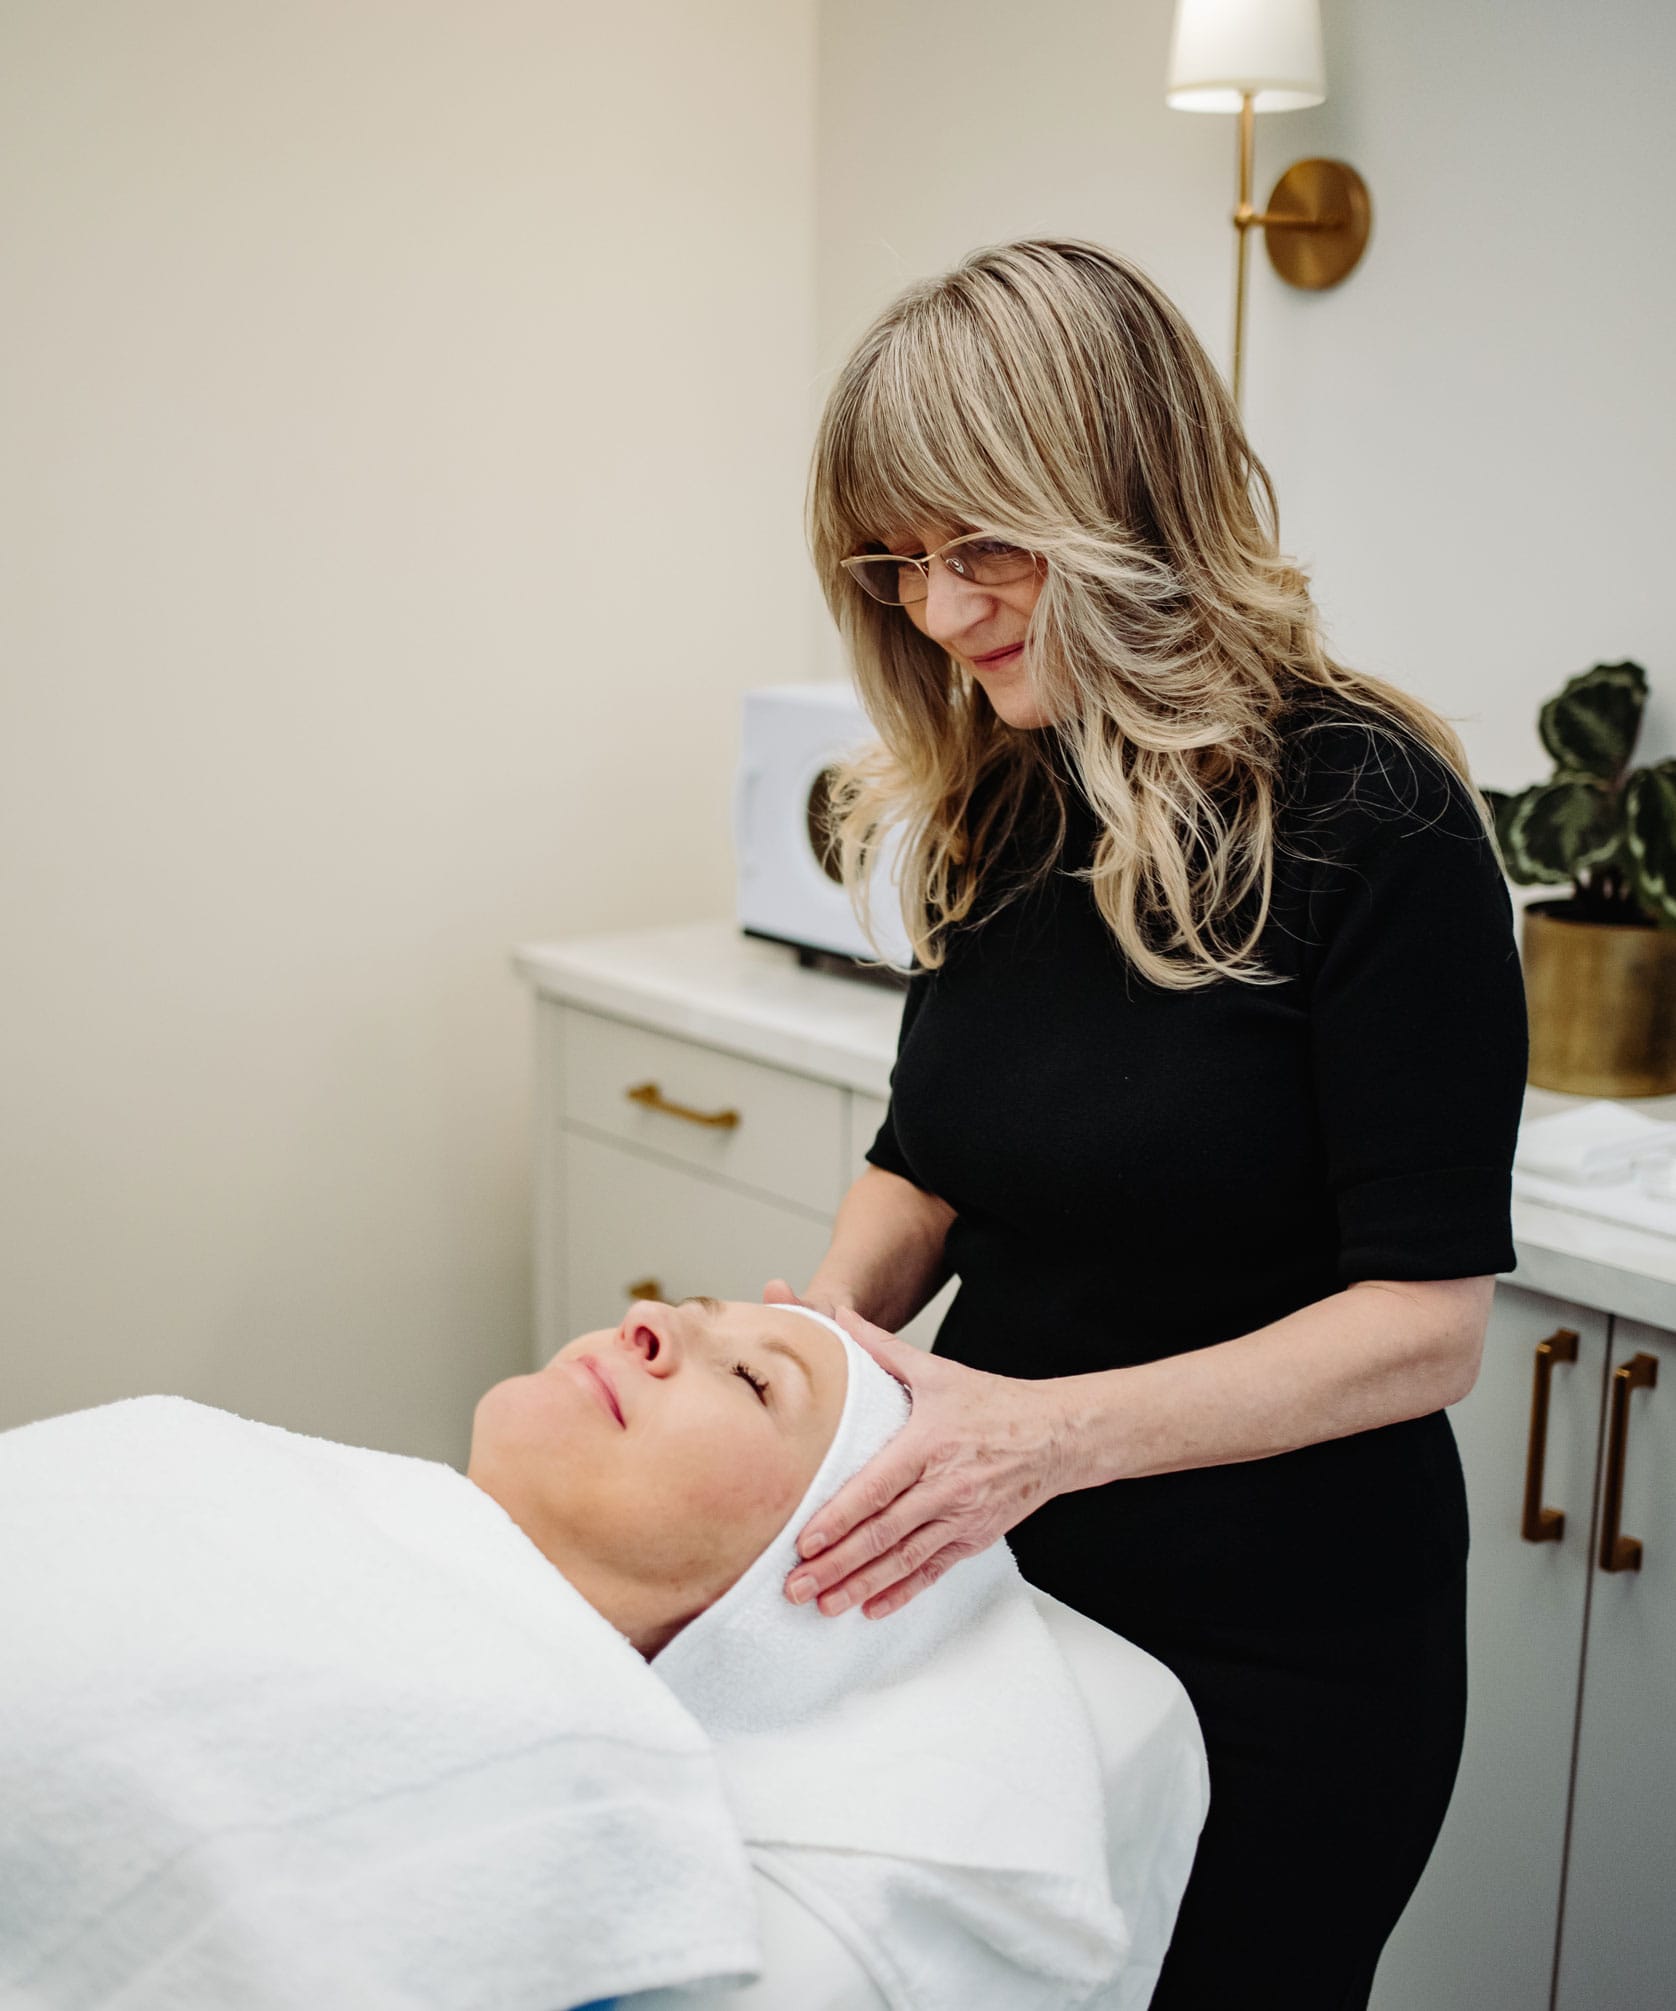 Louise Green providing services in her Ottawa Skin Clinic